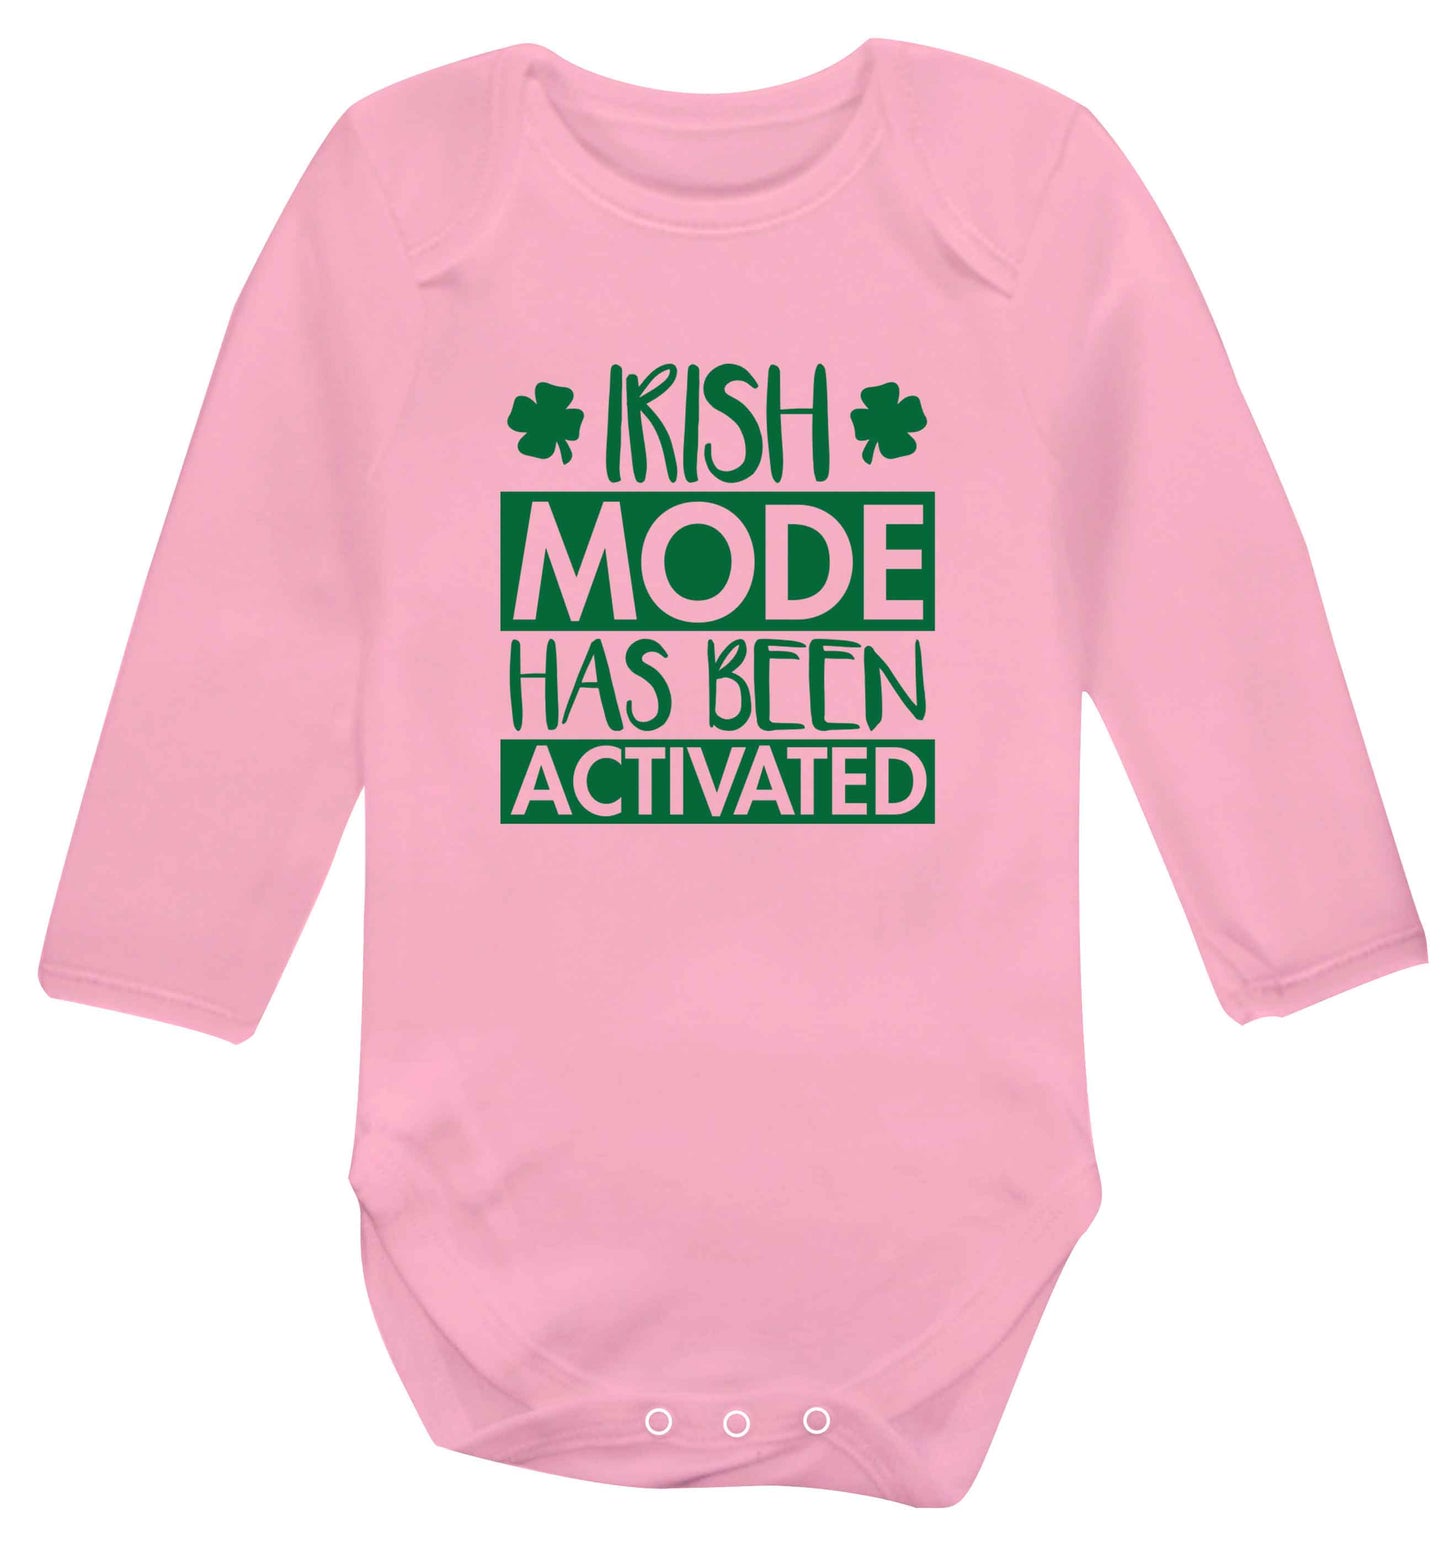 Irish mode has been activated baby vest long sleeved pale pink 6-12 months